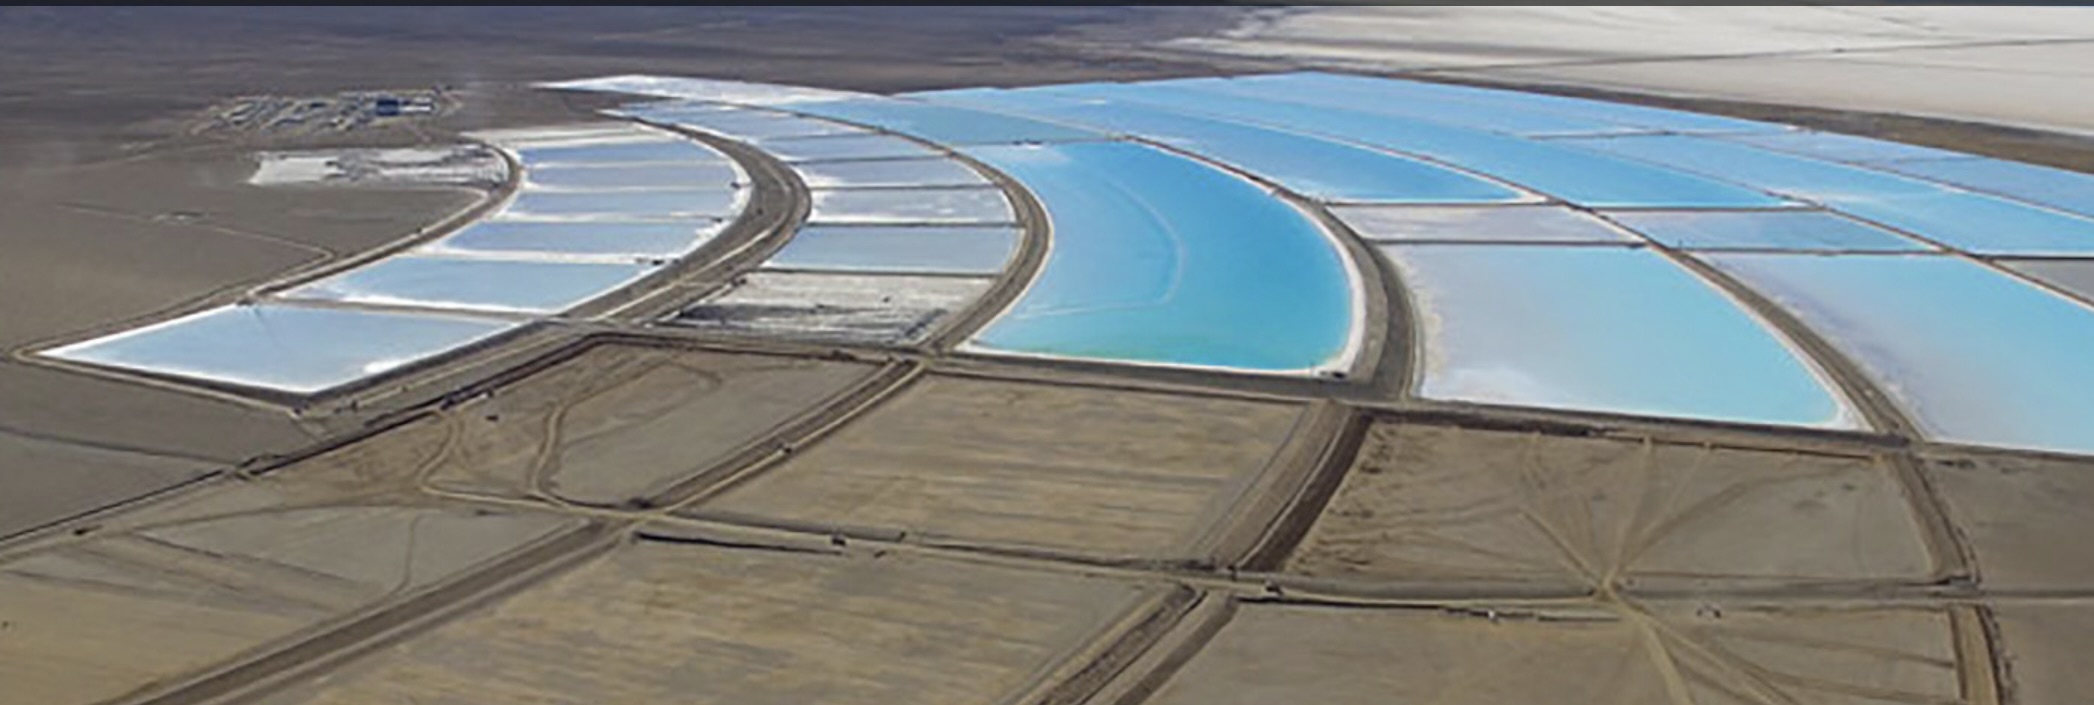 Chinese Lithium Giant Expands Operations in Argentina